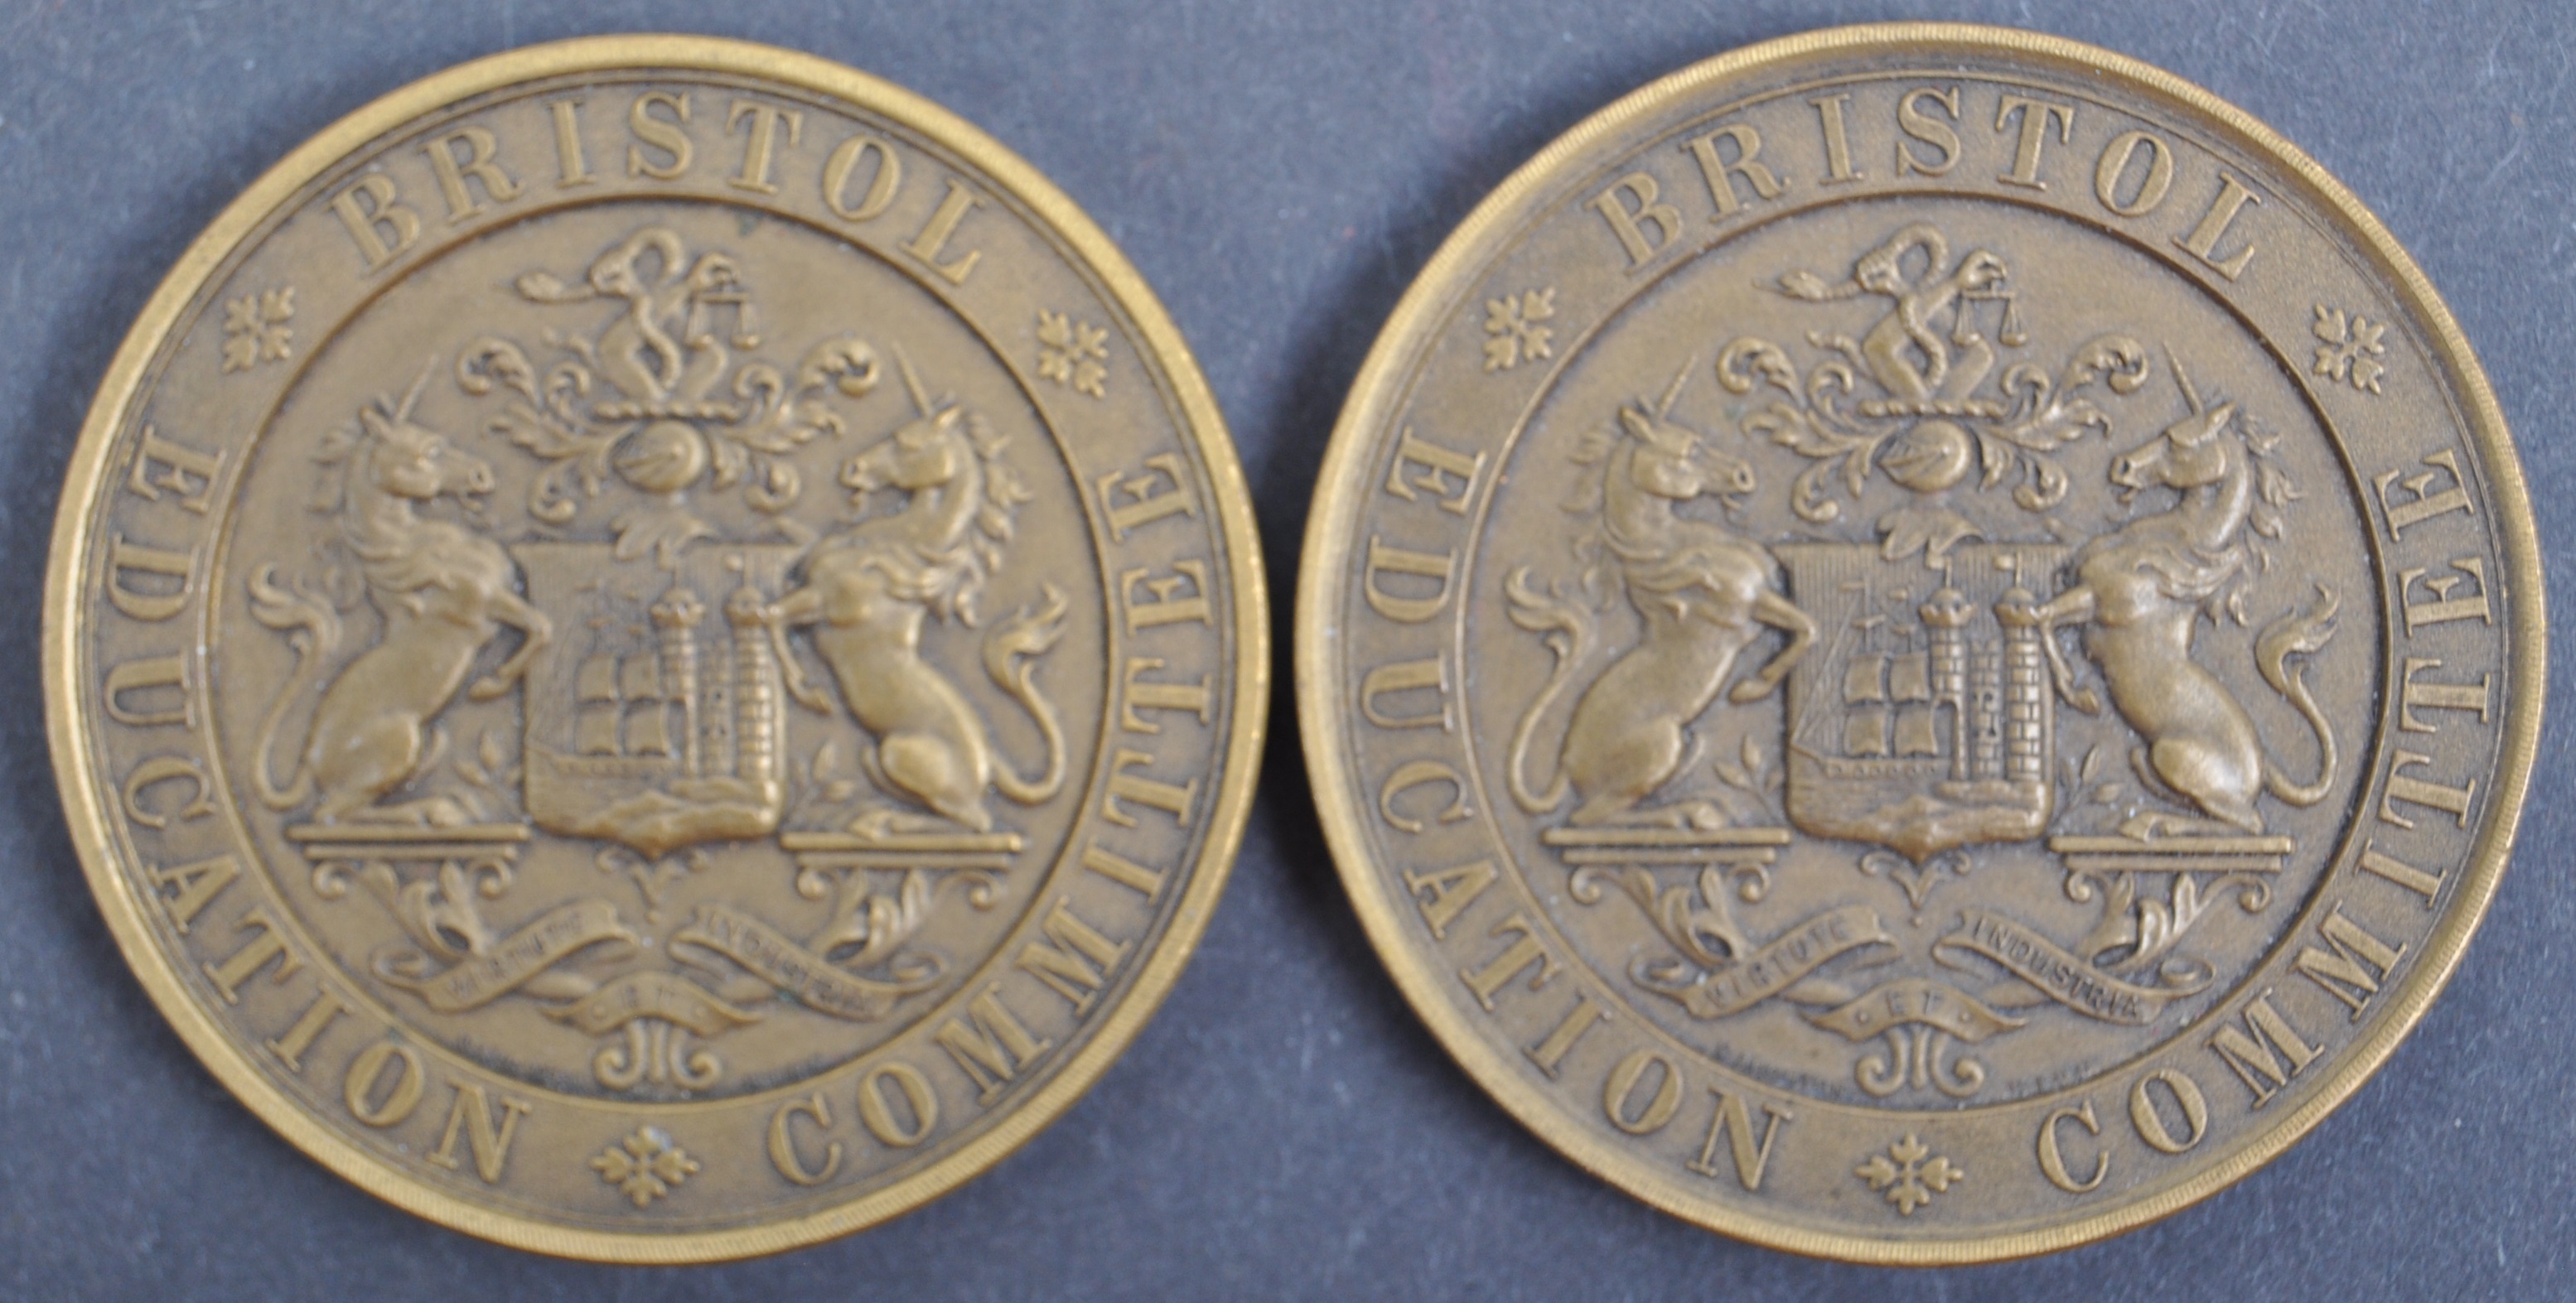 WWI FIRST WORLD WAR MEDAL PAIR & EFFECTS - PRIVATE IN ROYAL SUSSEX RGMT - Image 5 of 8